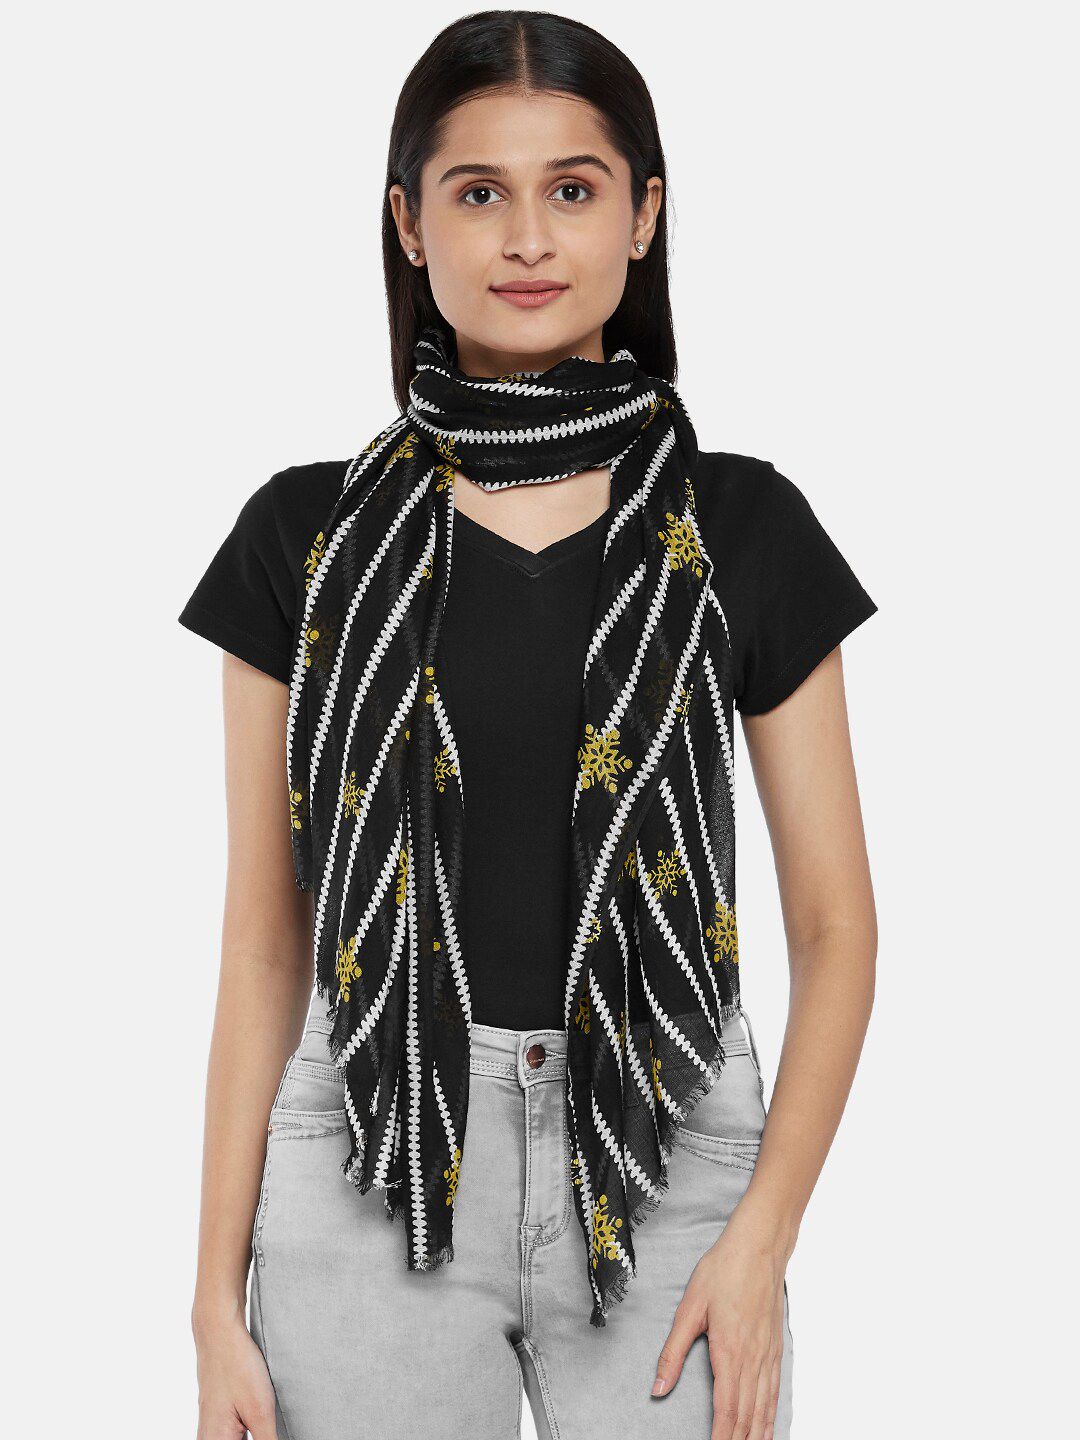 Honey by Pantaloons Women Black & White Striped Scarf Price in India